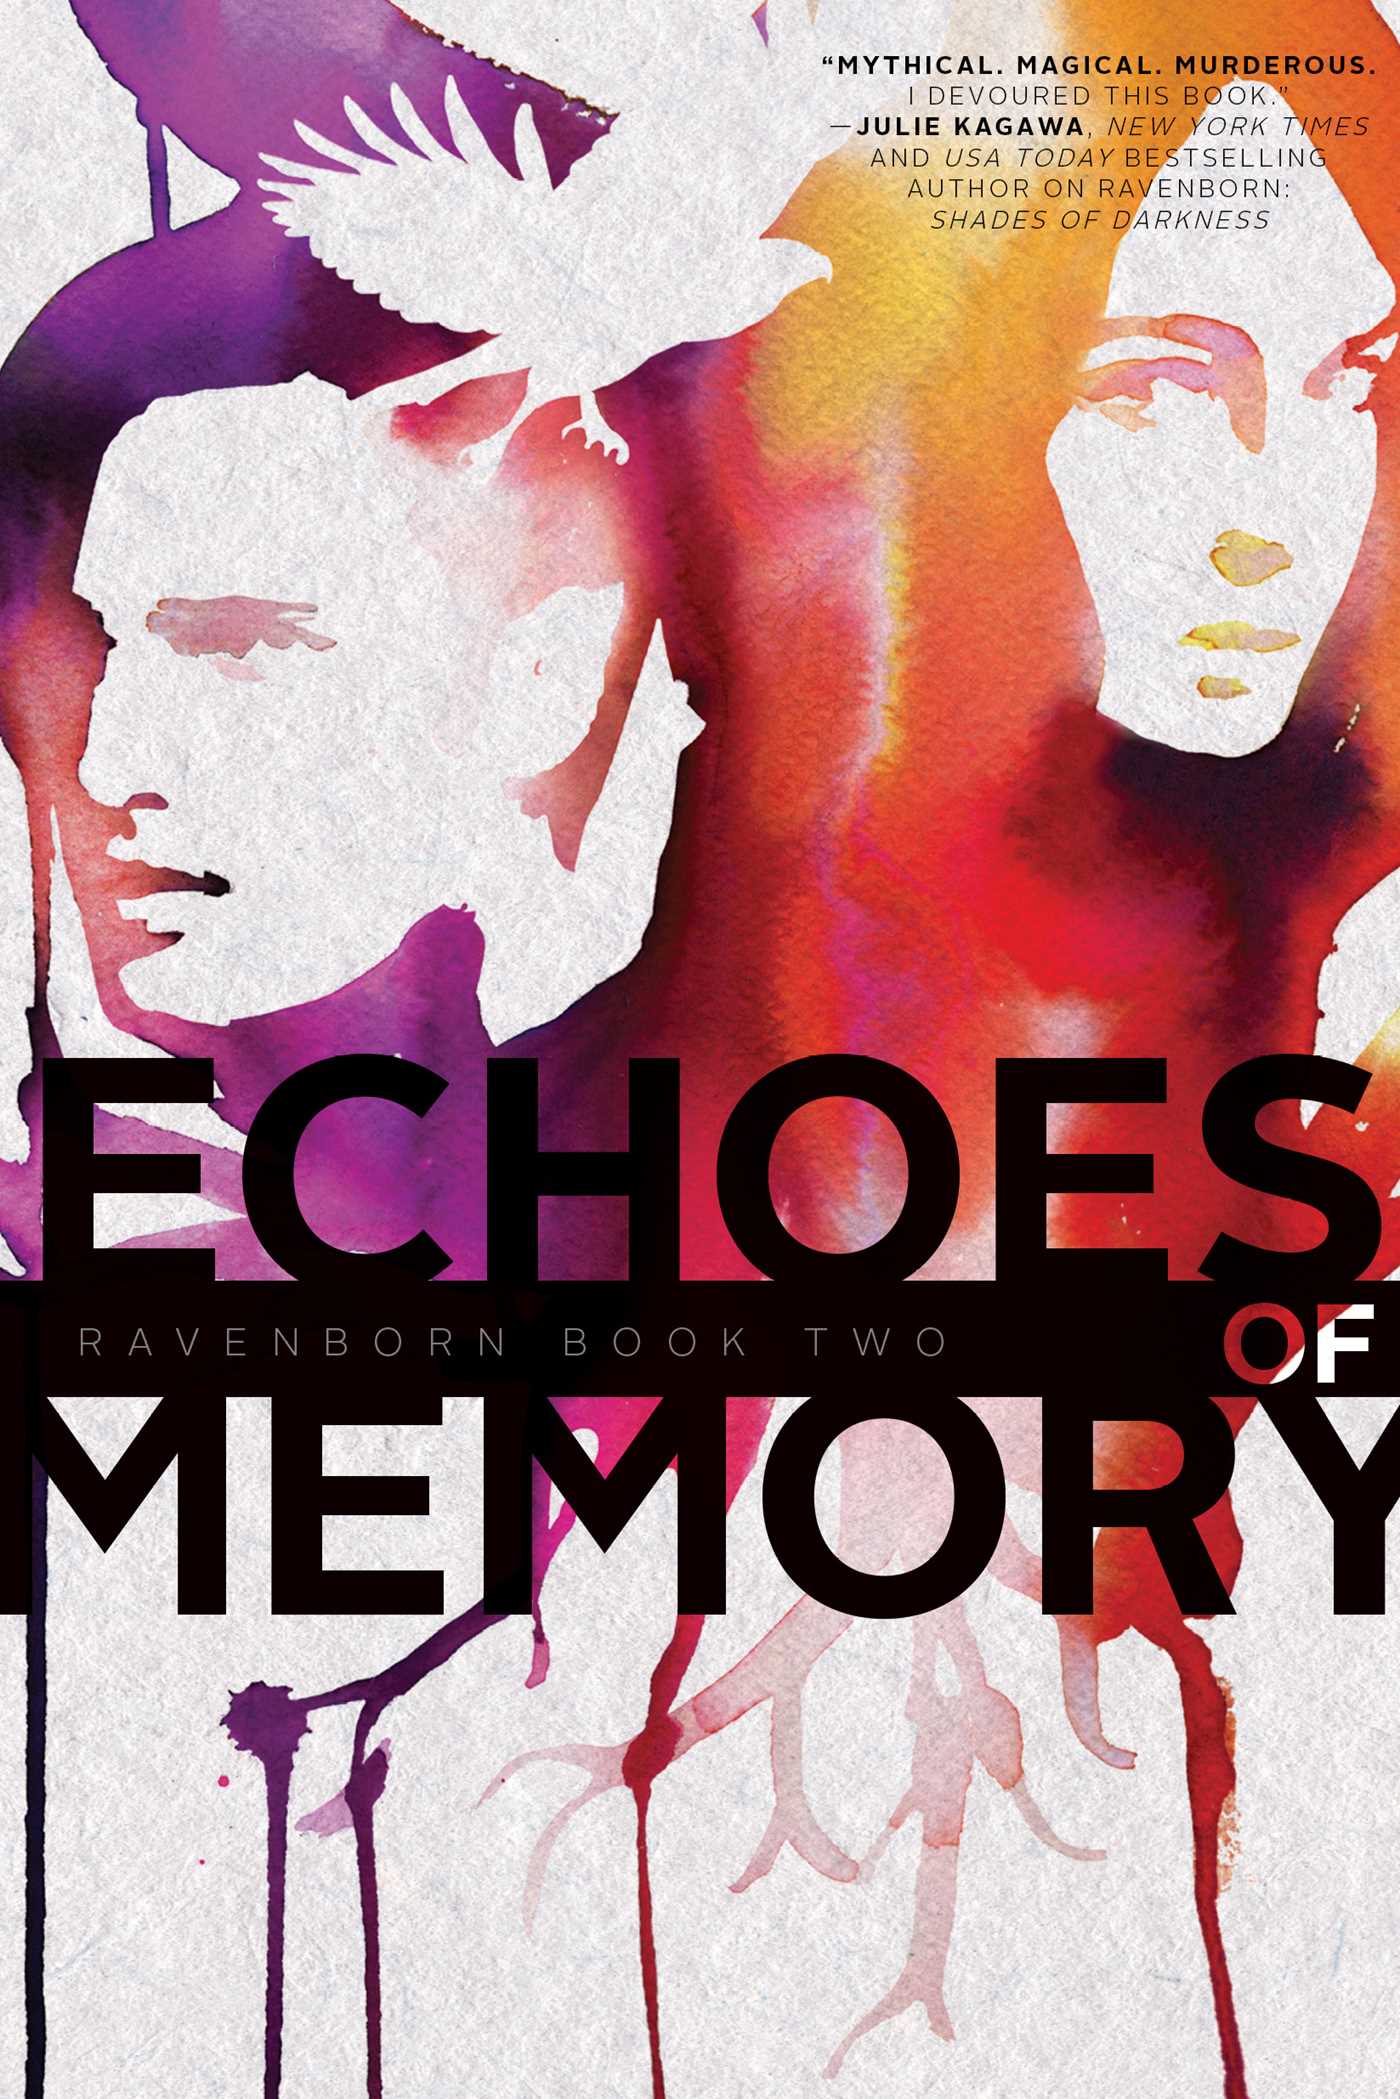 echoes-of-memory-9781481432603_hr